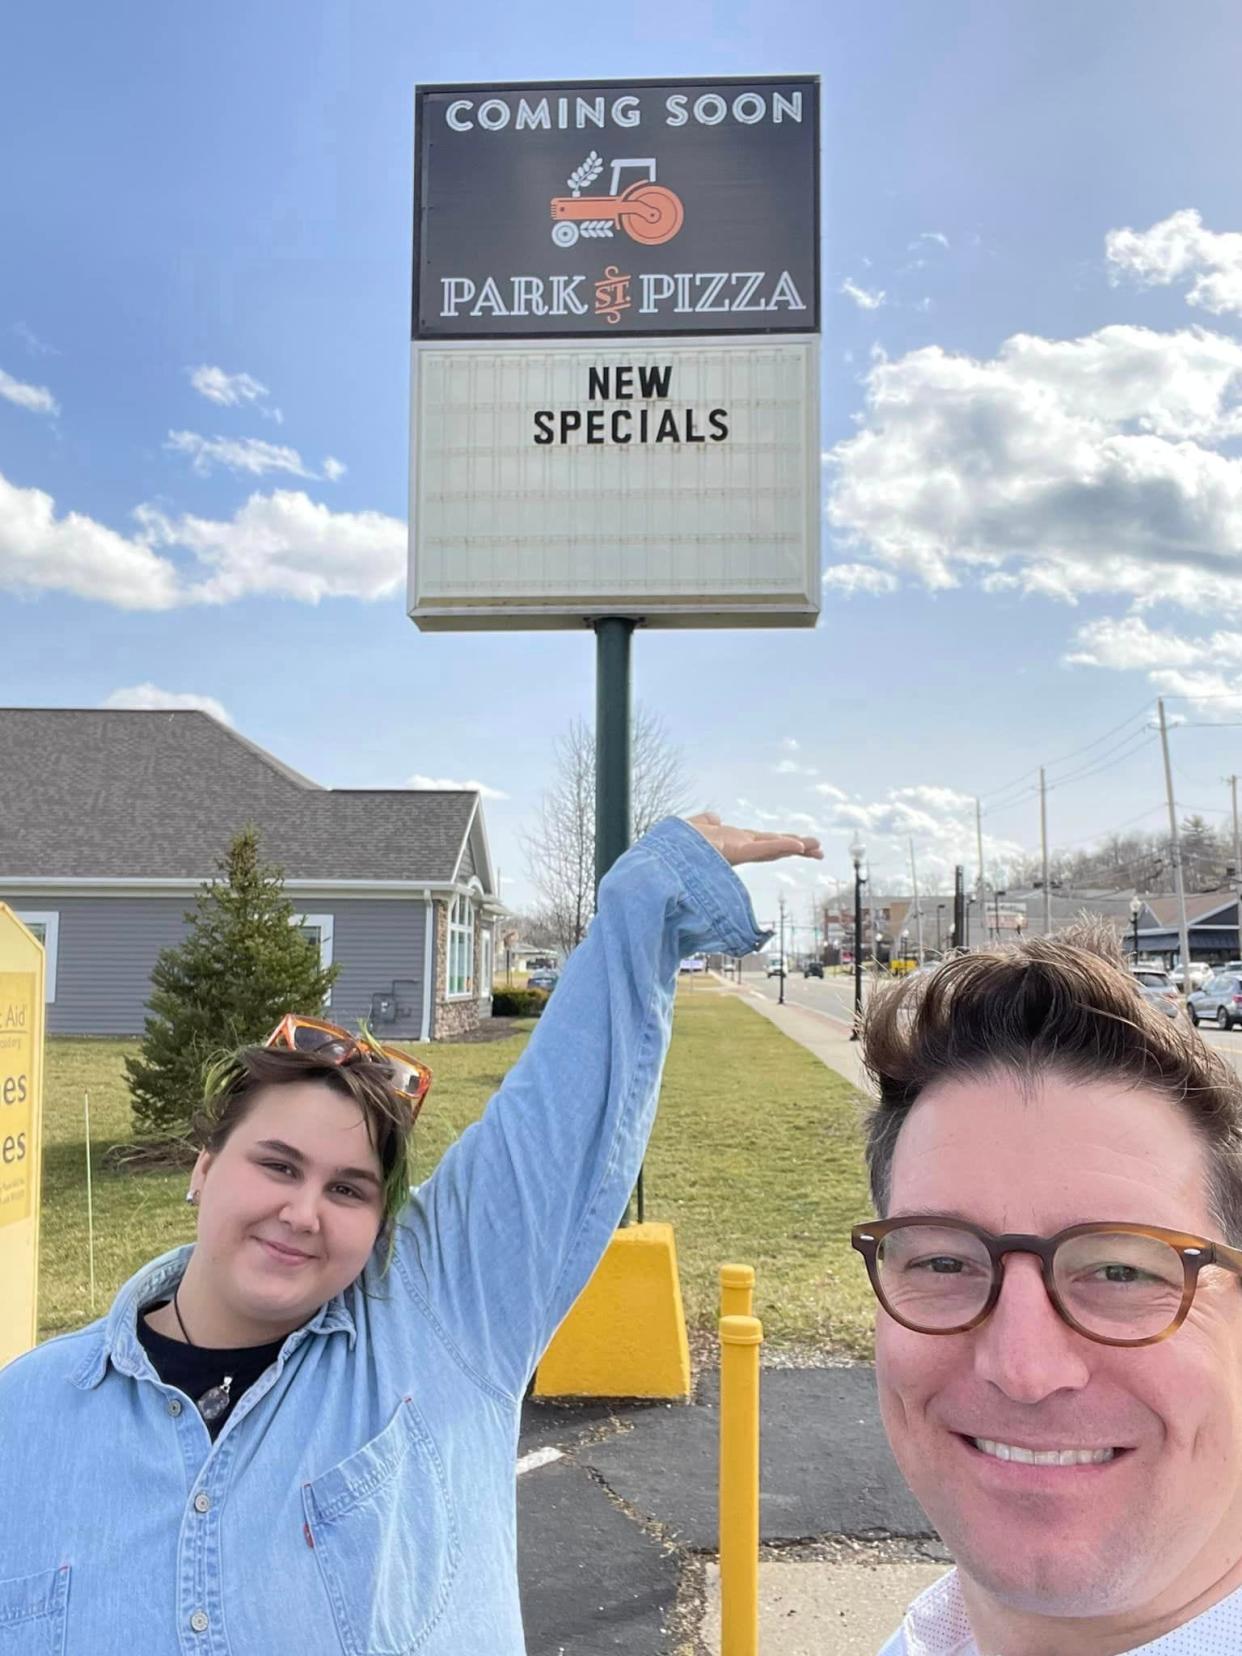 Jaynie Hazlett, general manager of the new North Canton location, and founder, Rocky Shanower, stand in front of the Park Street Pizza sign at 1212 S. Main St. The sign denoting new specials is from a previous business, as Park Street Pizza will offer a menu very similar to its original location.